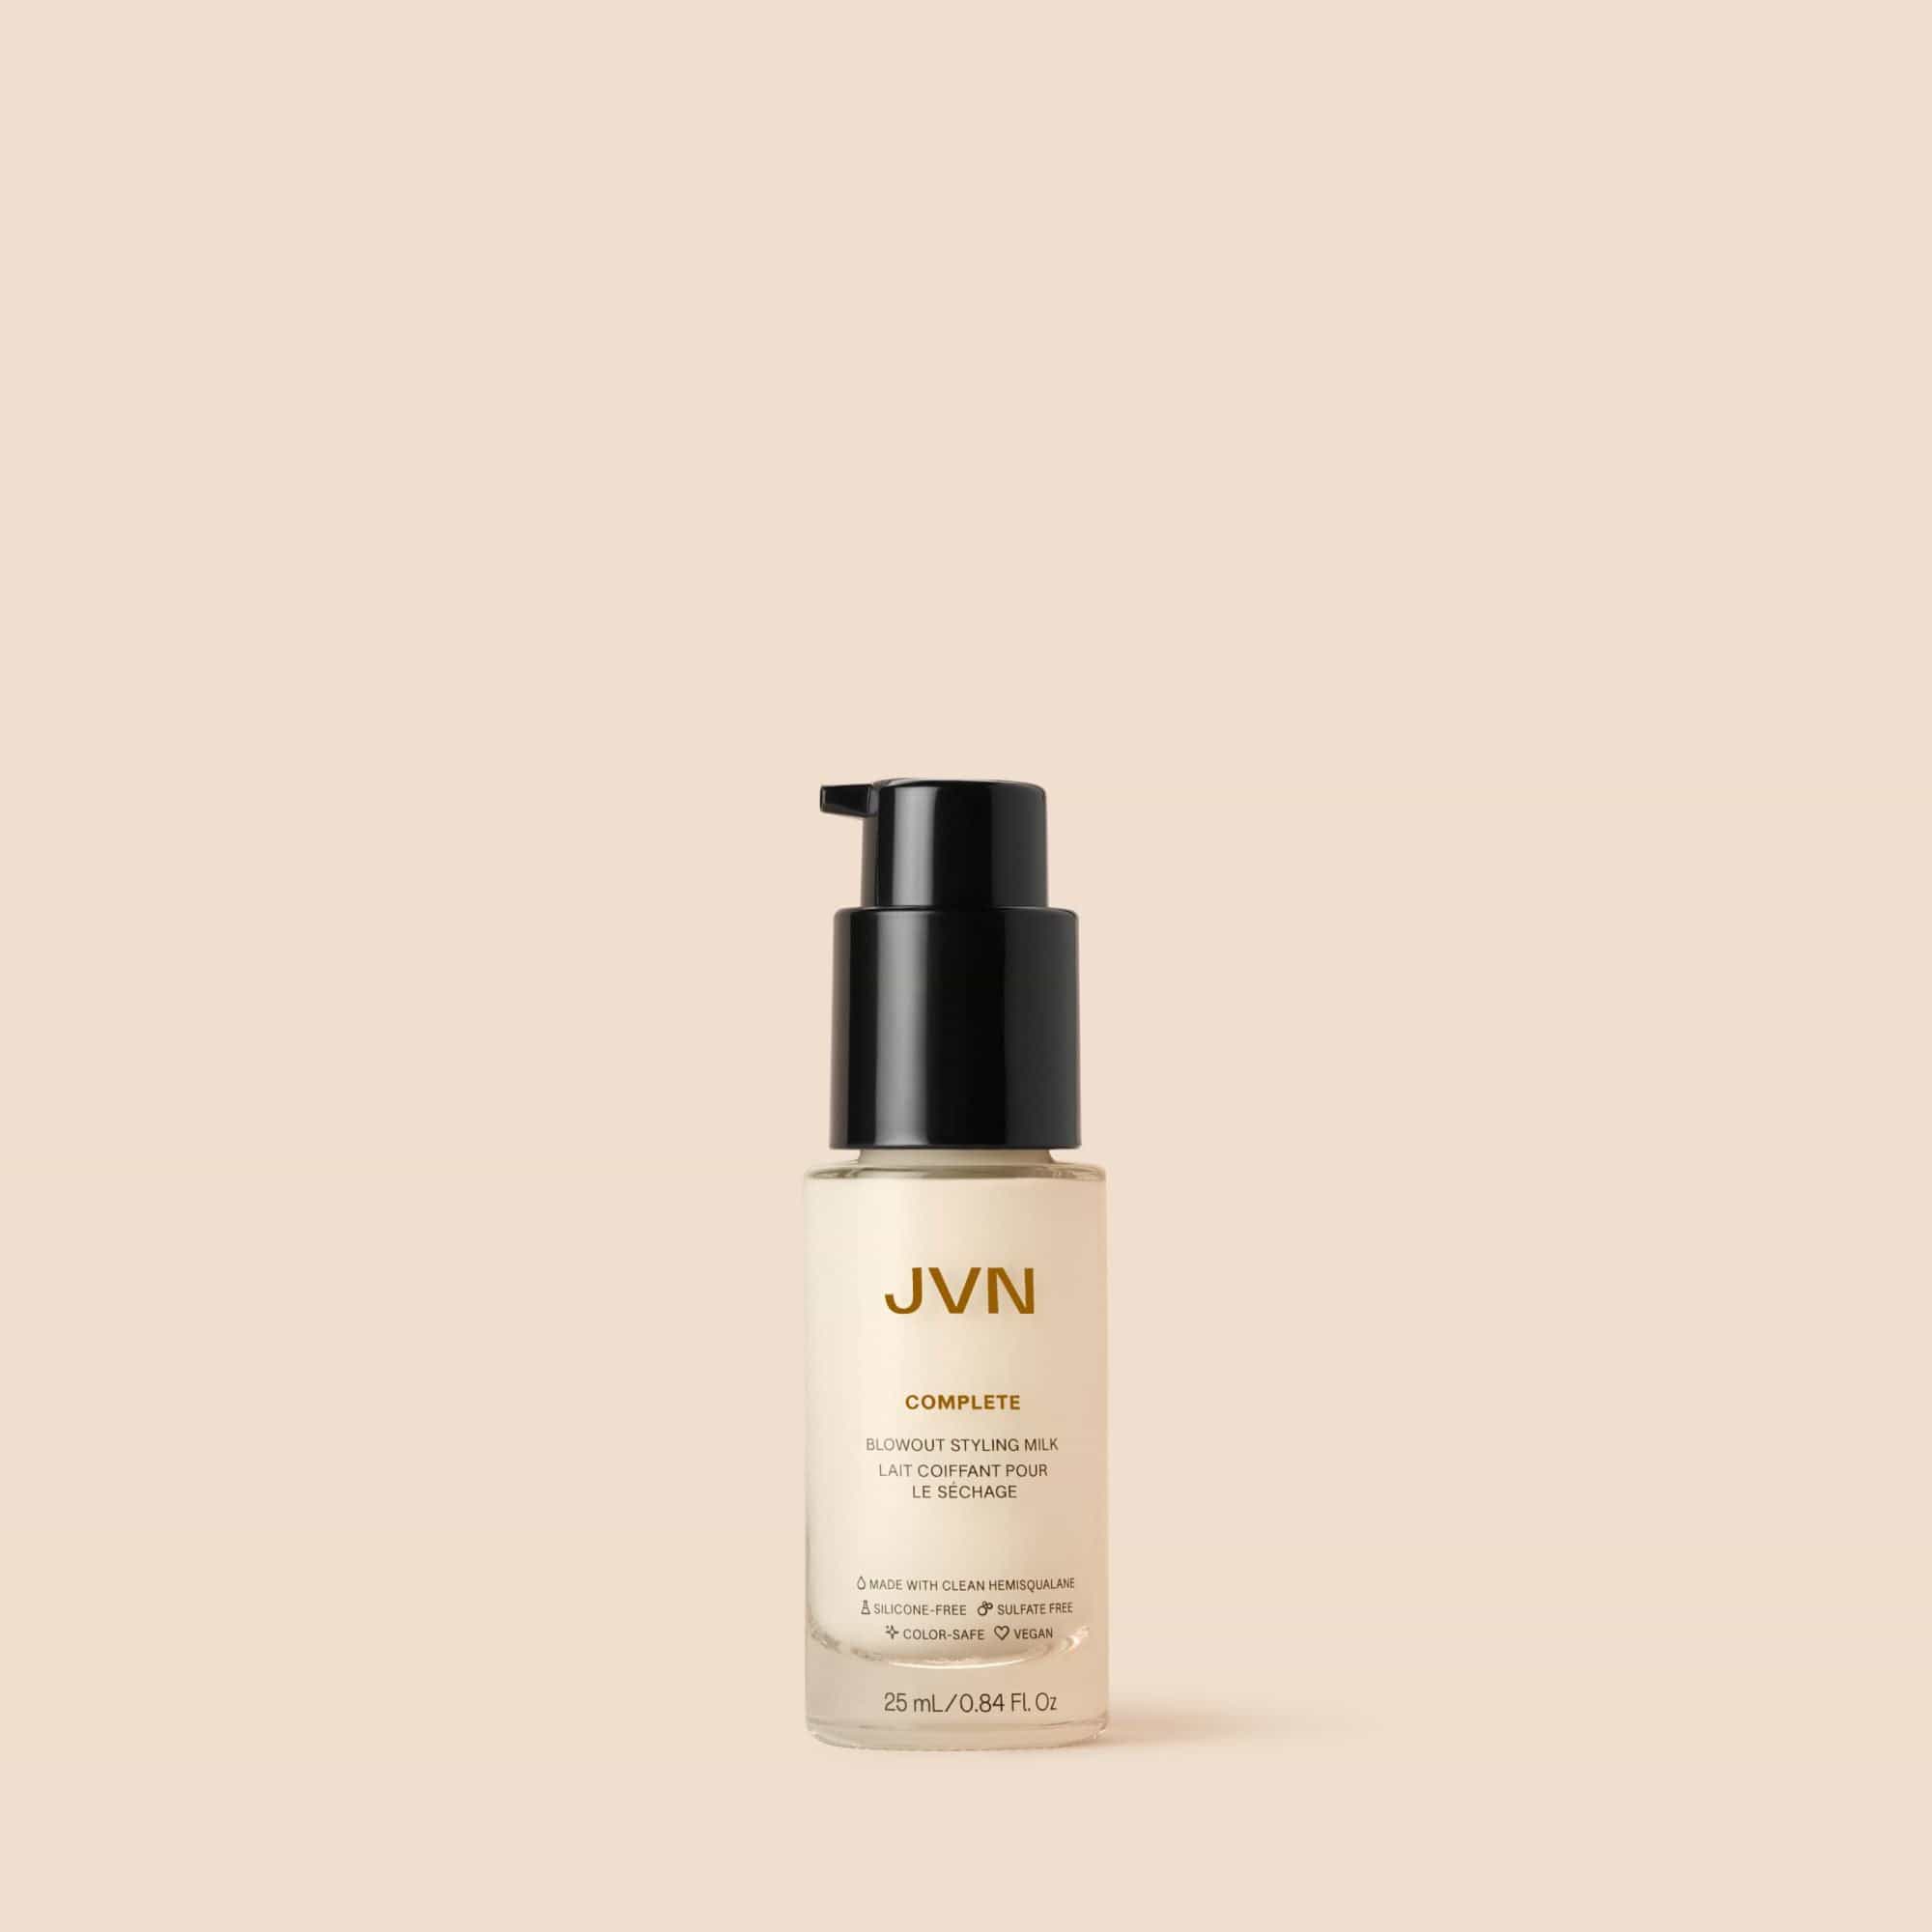 JVN Styler Complete Blowout Styling Milk Travel sulfate-free silicone-free sustainable